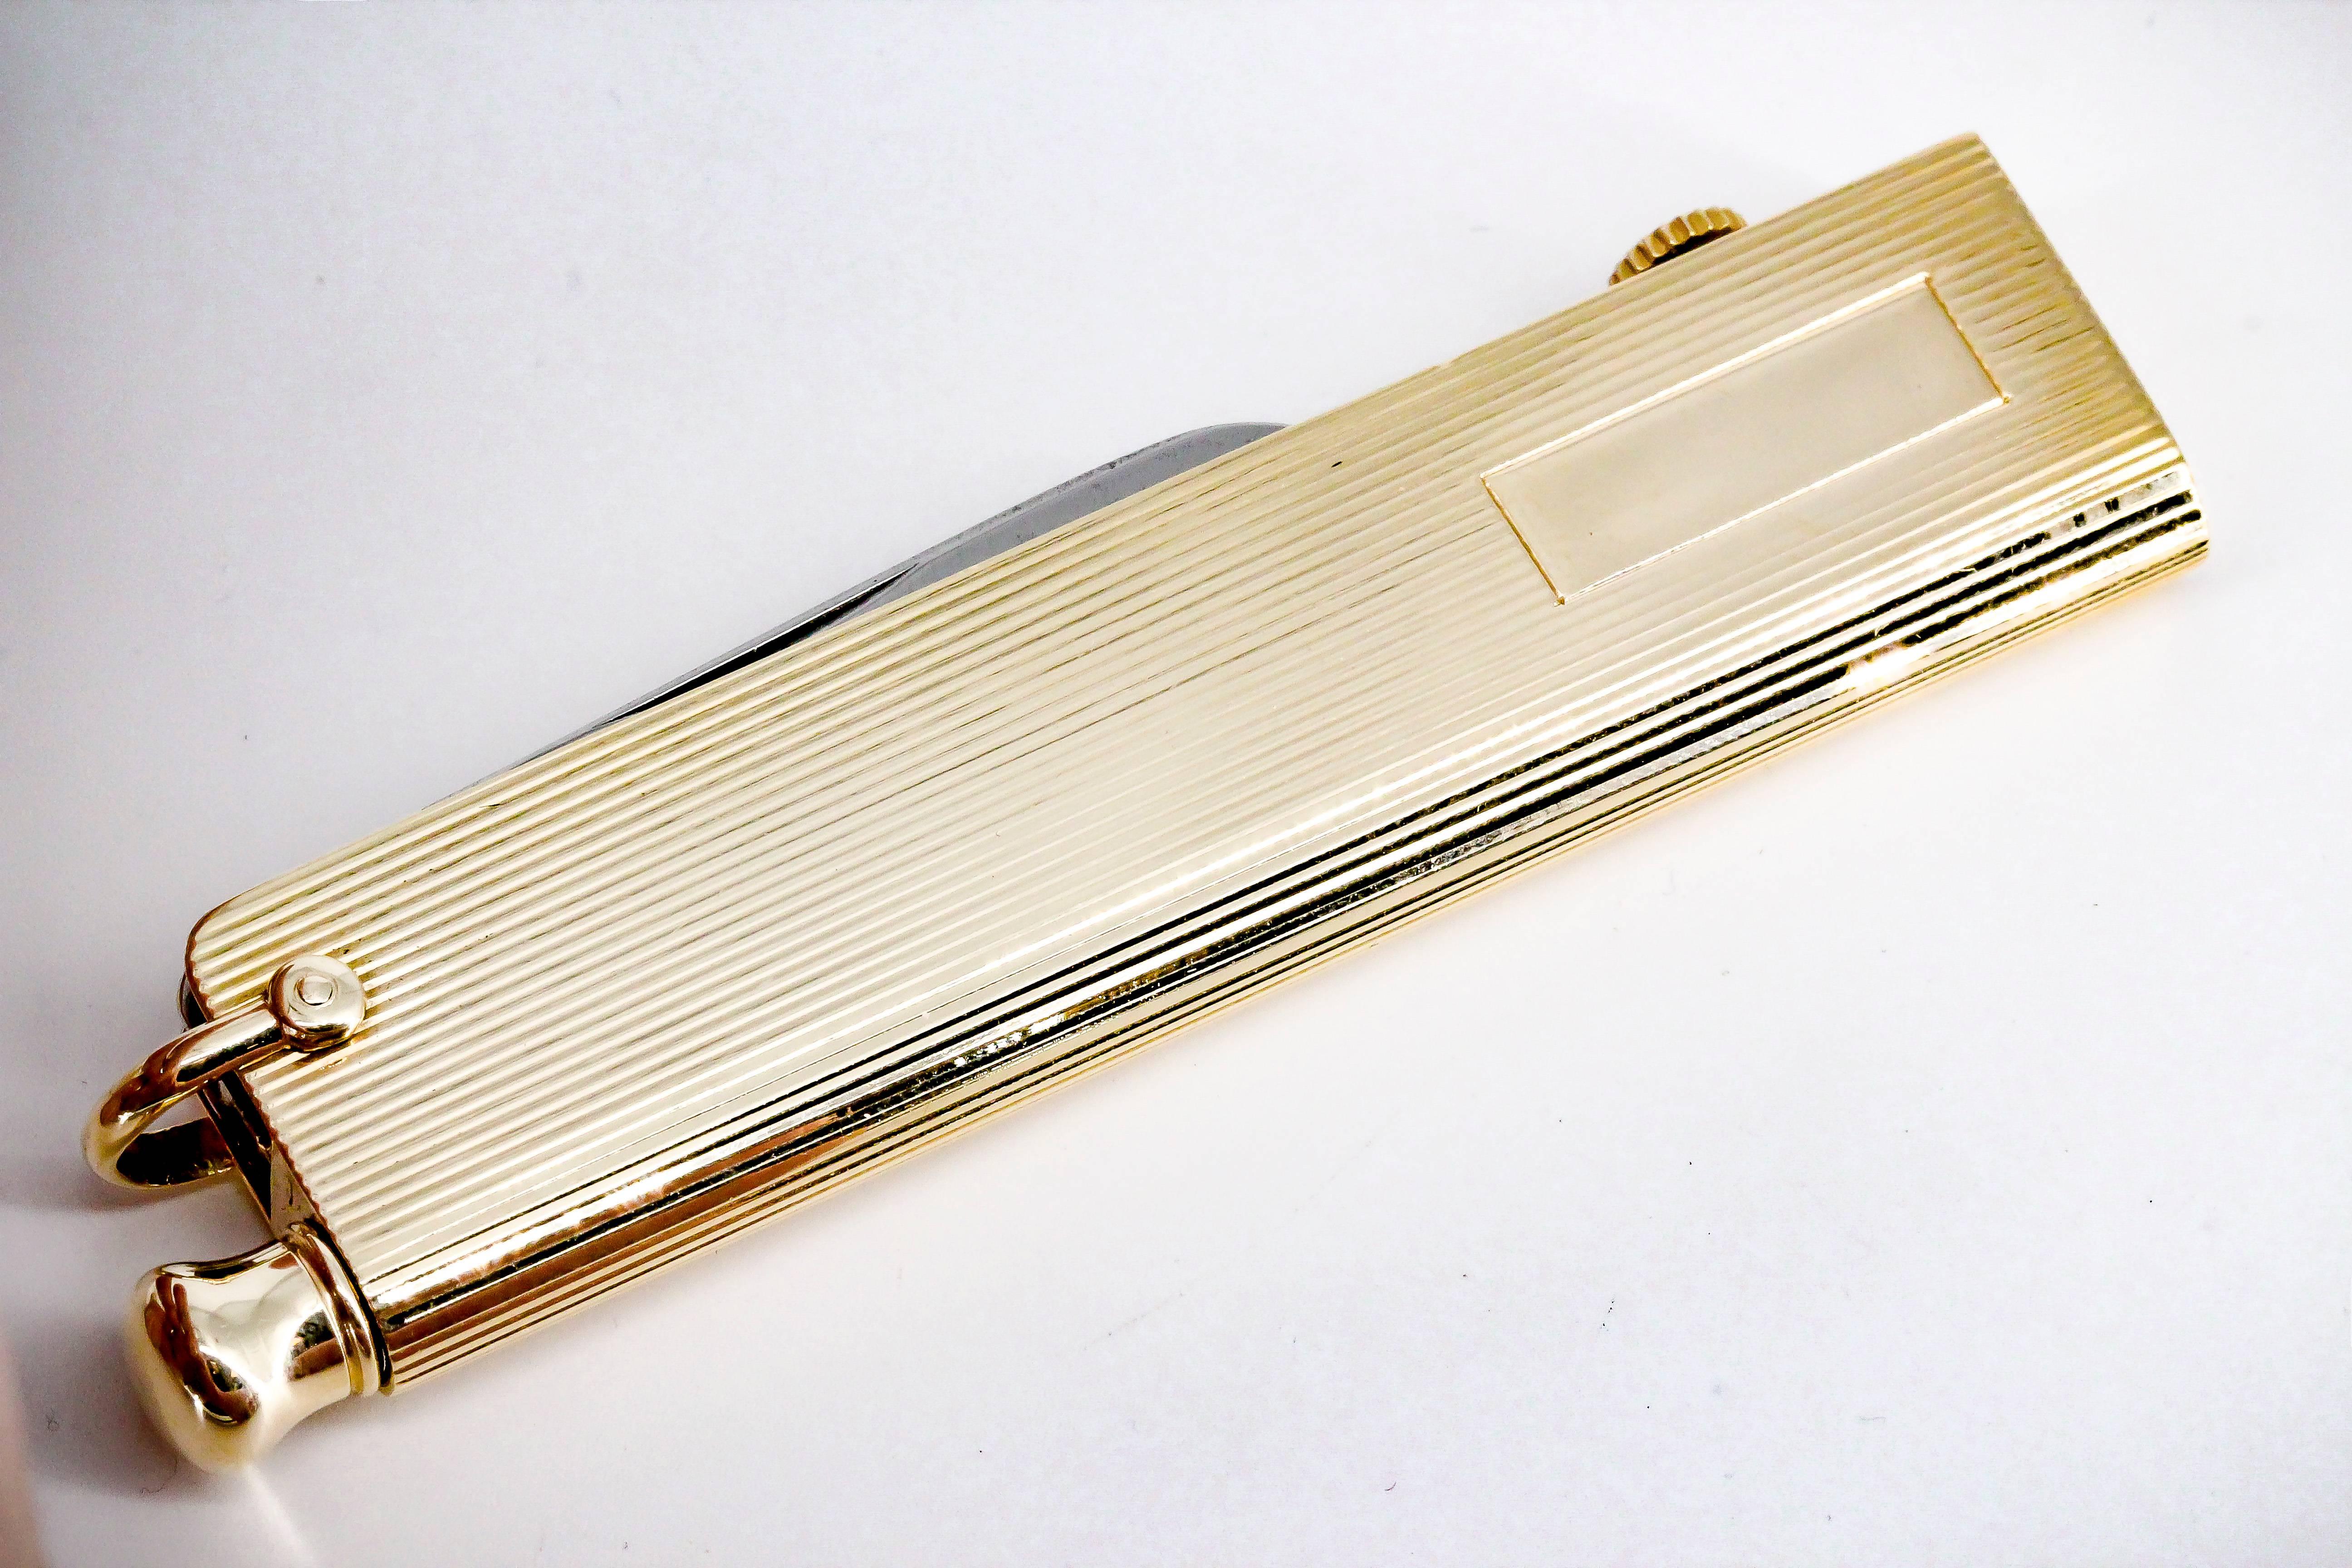 Rare and unusual 14K yellow gold utility tool by Verdura. It features a folding knife, a hidden pencil that slides out of the bottom, a folding key that can be cut to size, and a clock on the top. Outer case is ribbed throughout the outside.